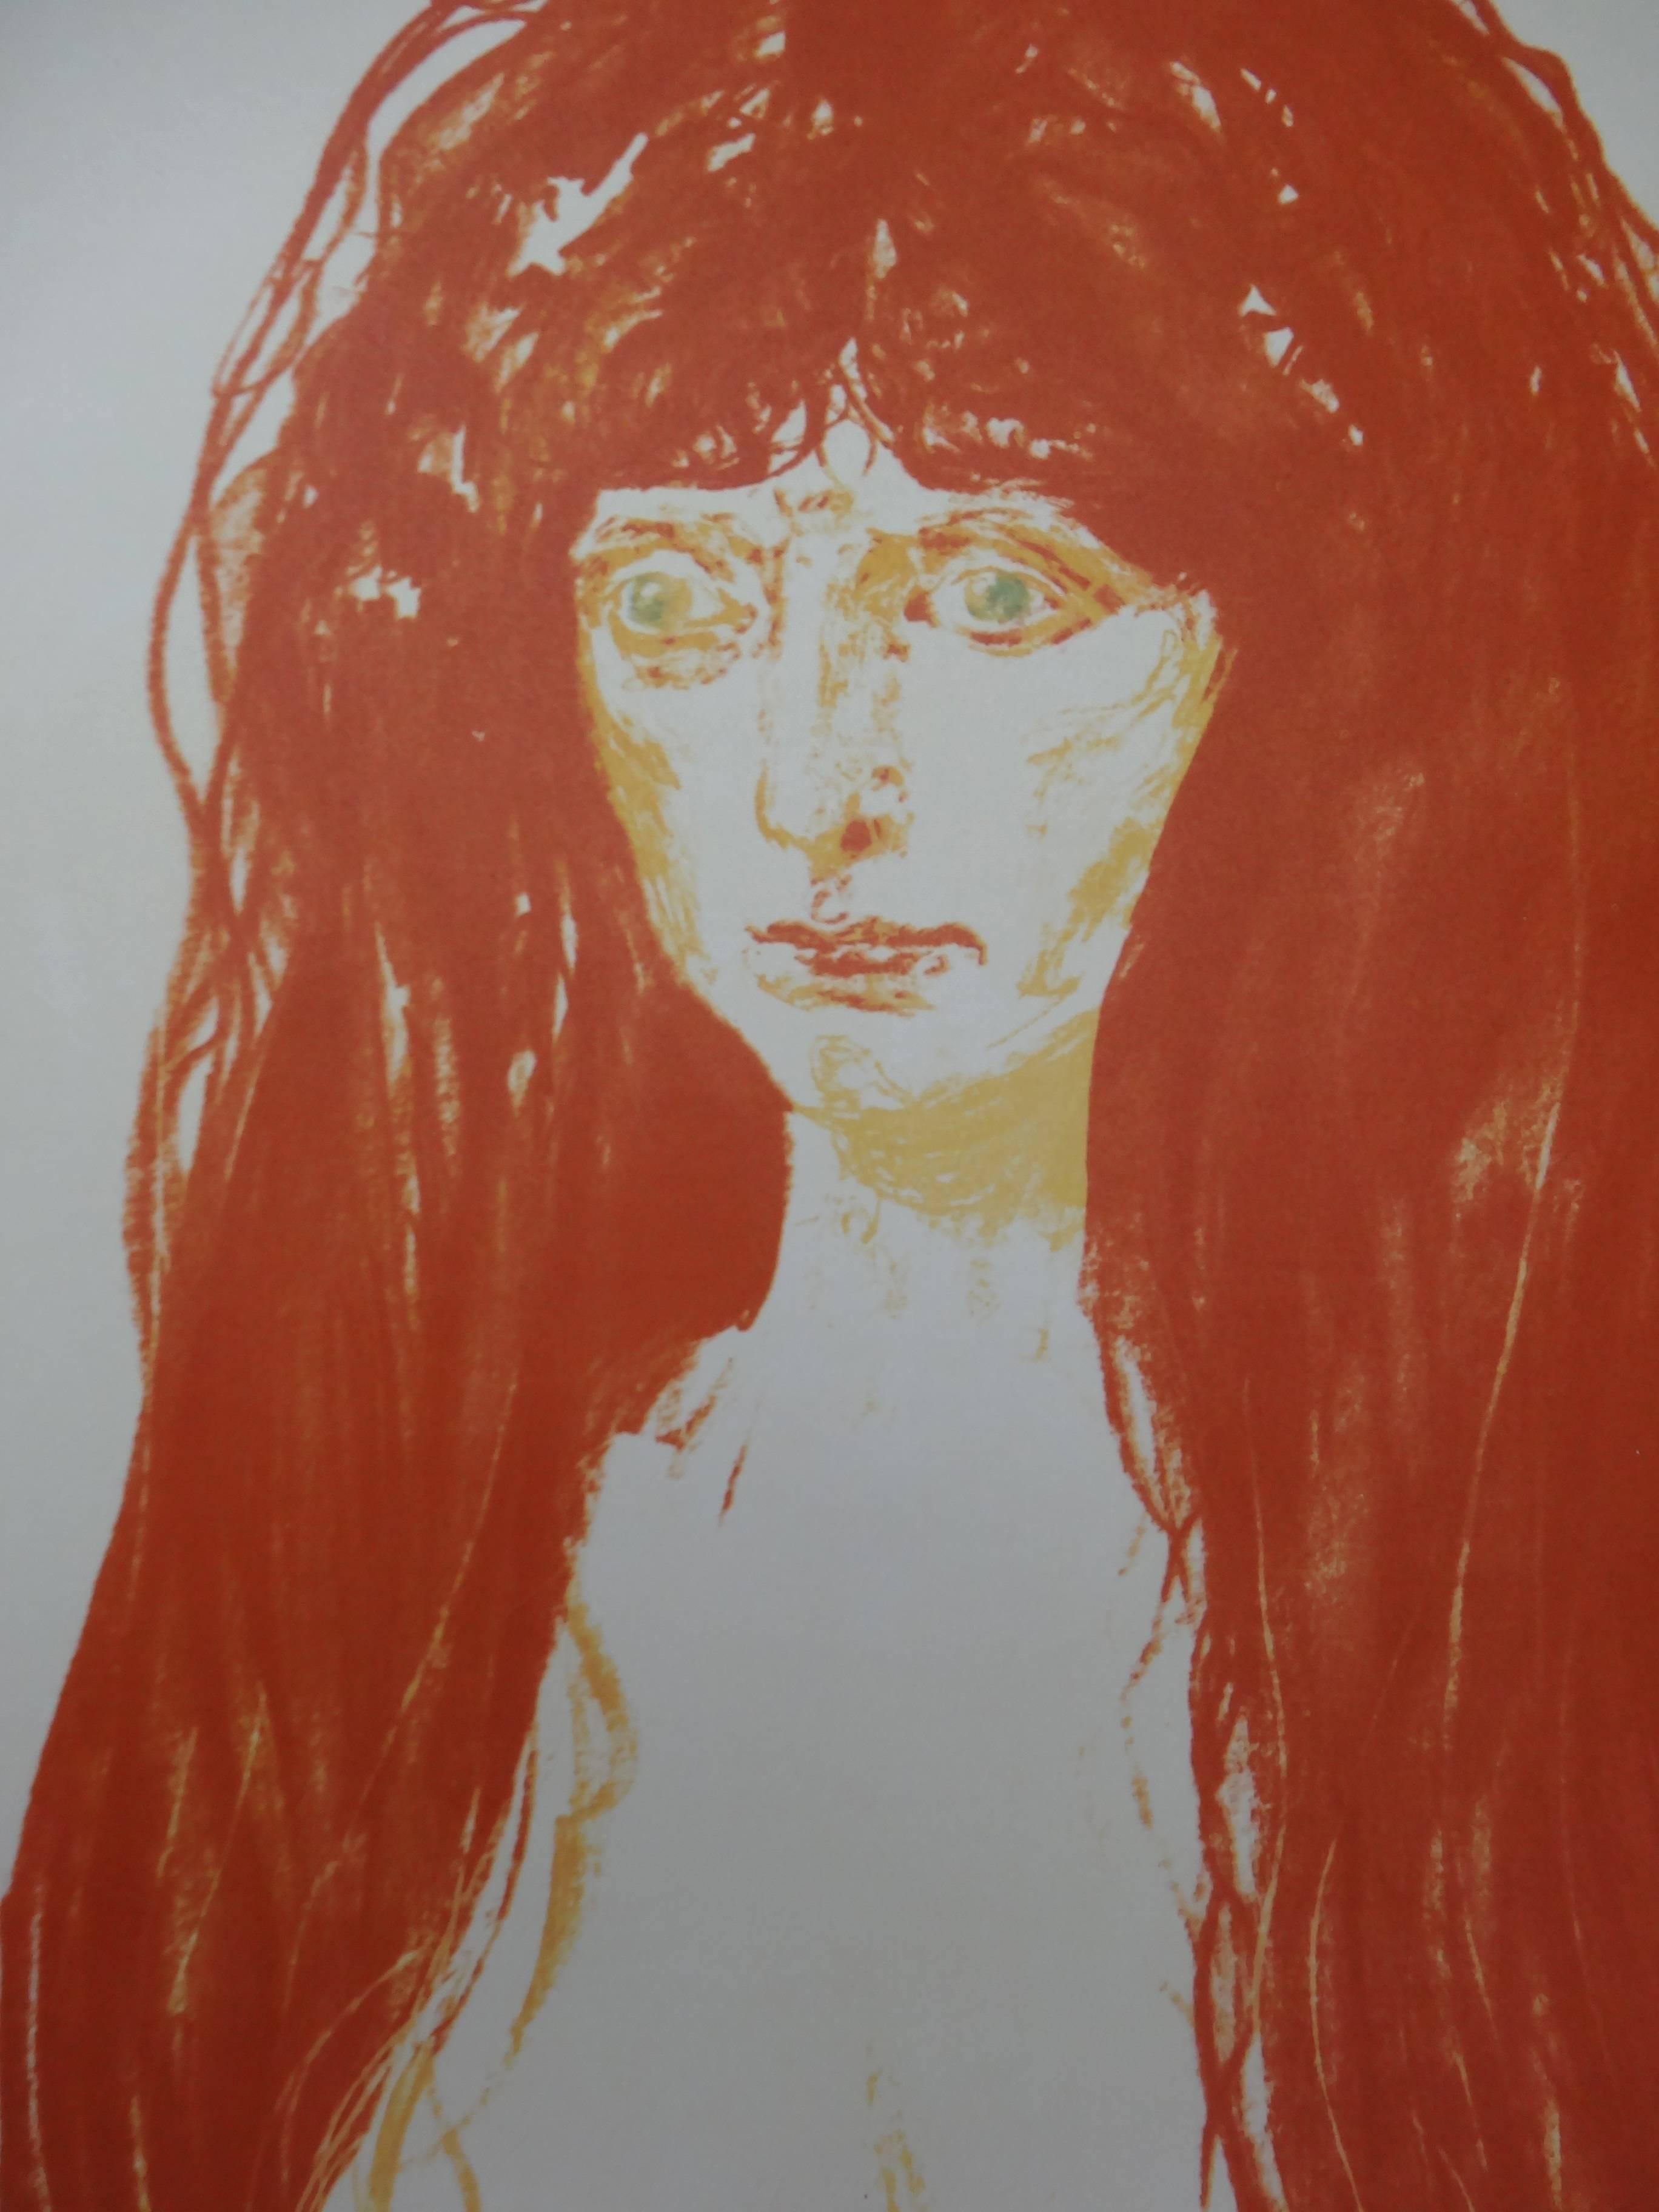 Redhead Woman - Lithograph Poster - Los Angeles County Museum - Gray Portrait Print by Edvard Munch